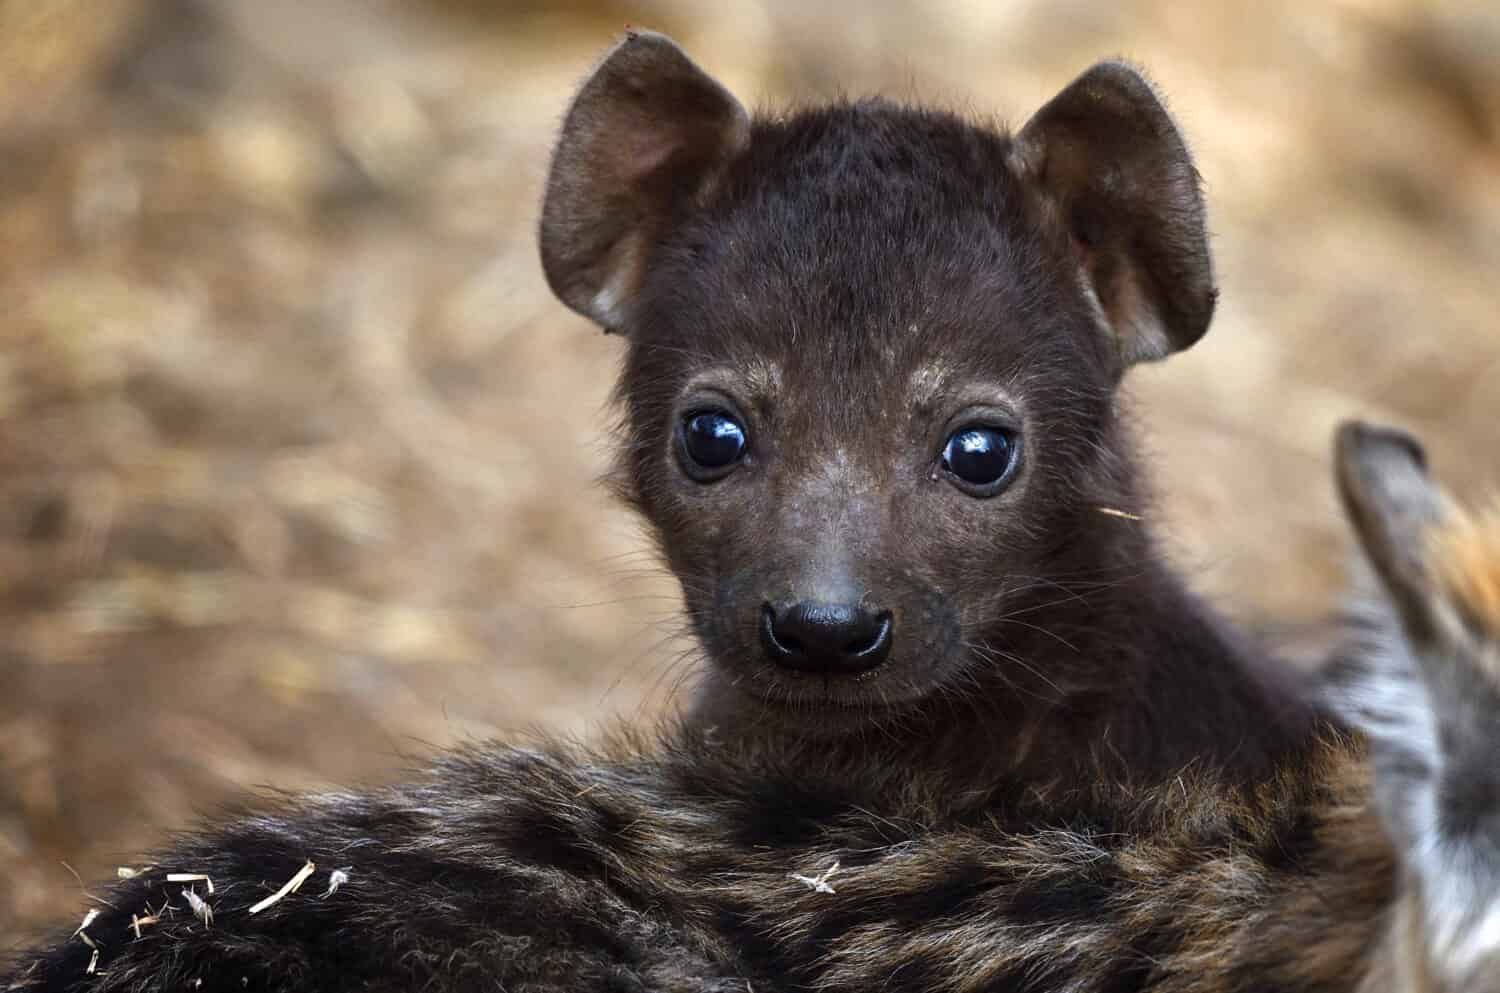 A tiny baby Spotted Hyena cub with all black fur close up